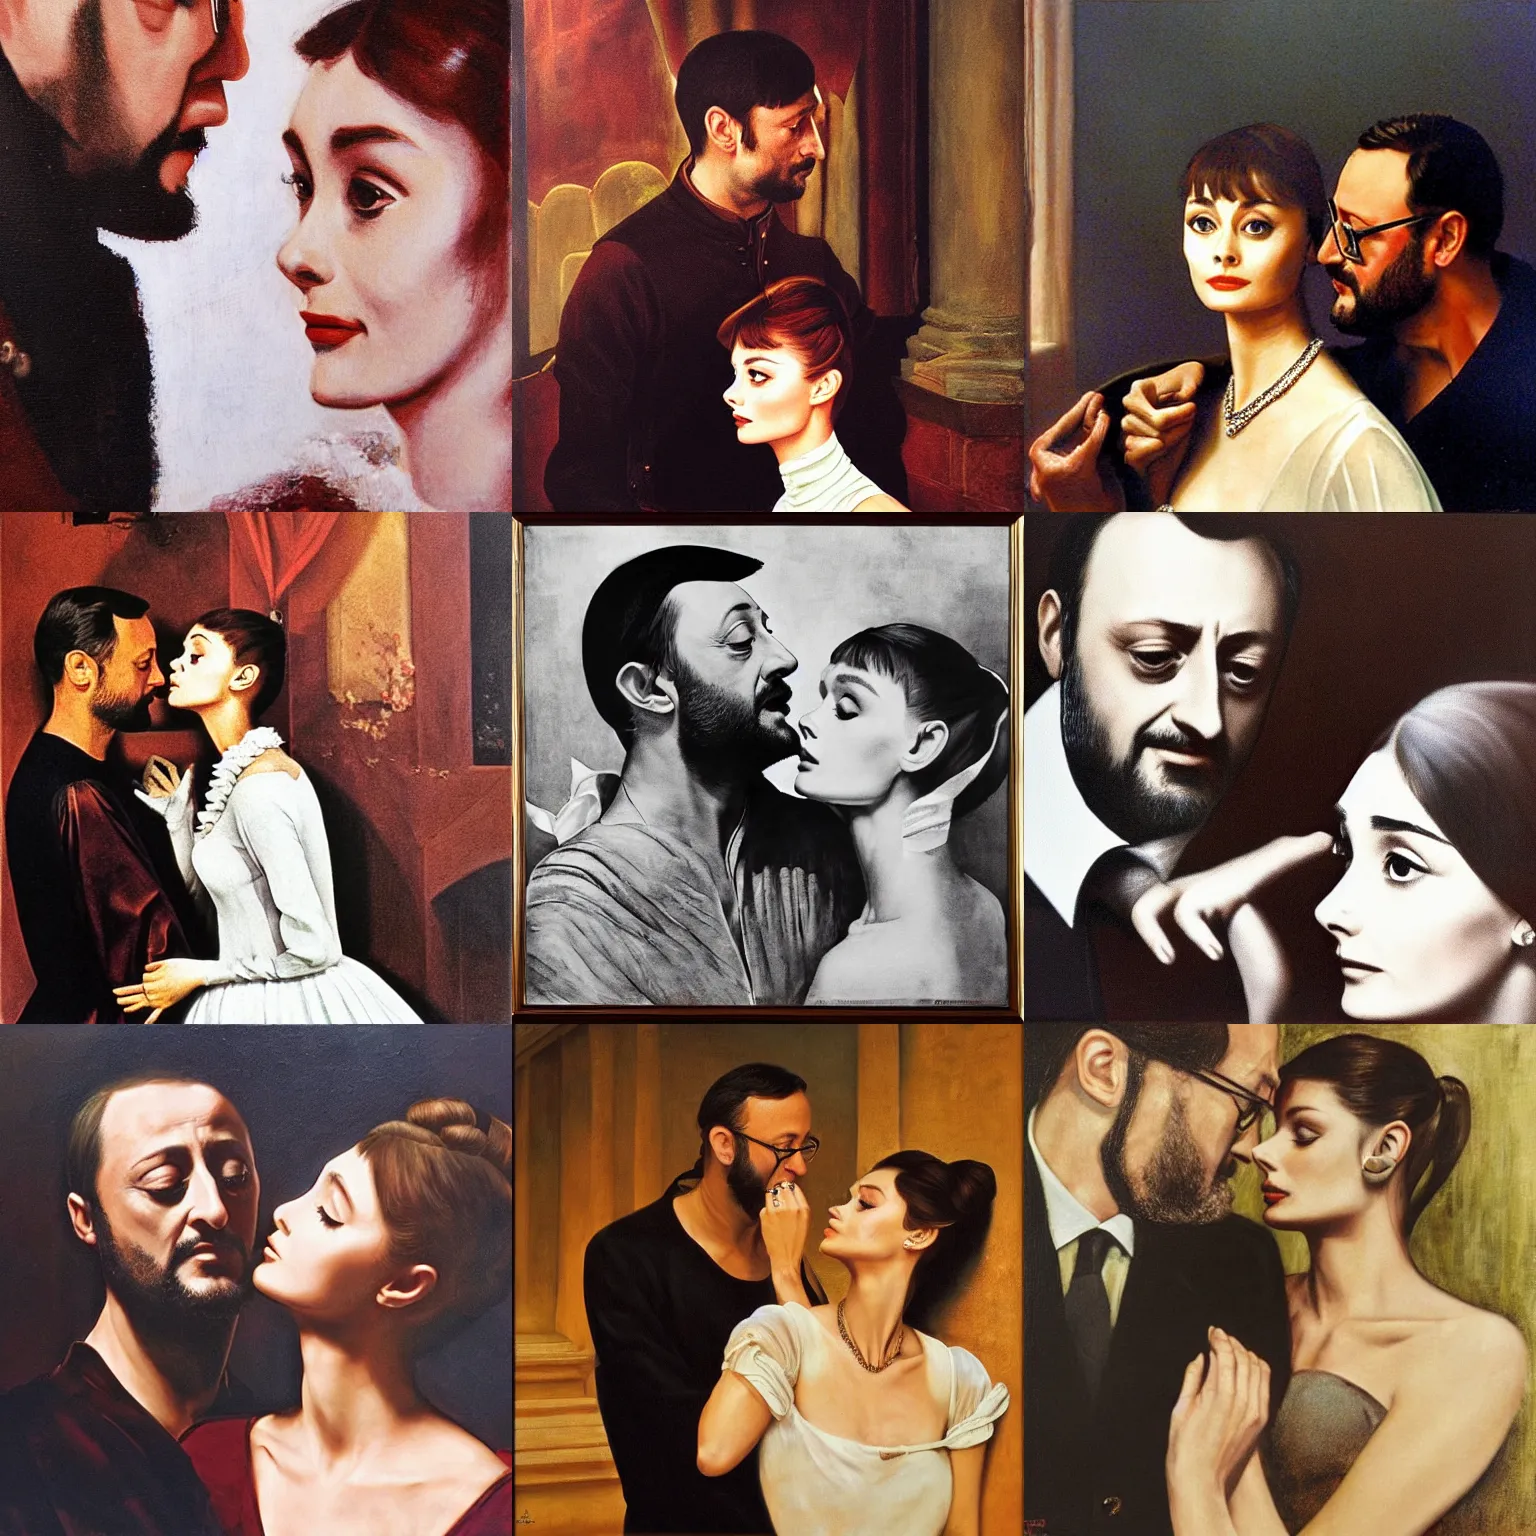 Prompt: Historical Romeo (Jean Reno) and Juliet (Audrey Hepburn), are looking at each other romantically. dramatic, romantic, tragic, restrained, lumnious, lighting, oil canvas by Frank Dicksee, Alfred Elmore, Mather Brown